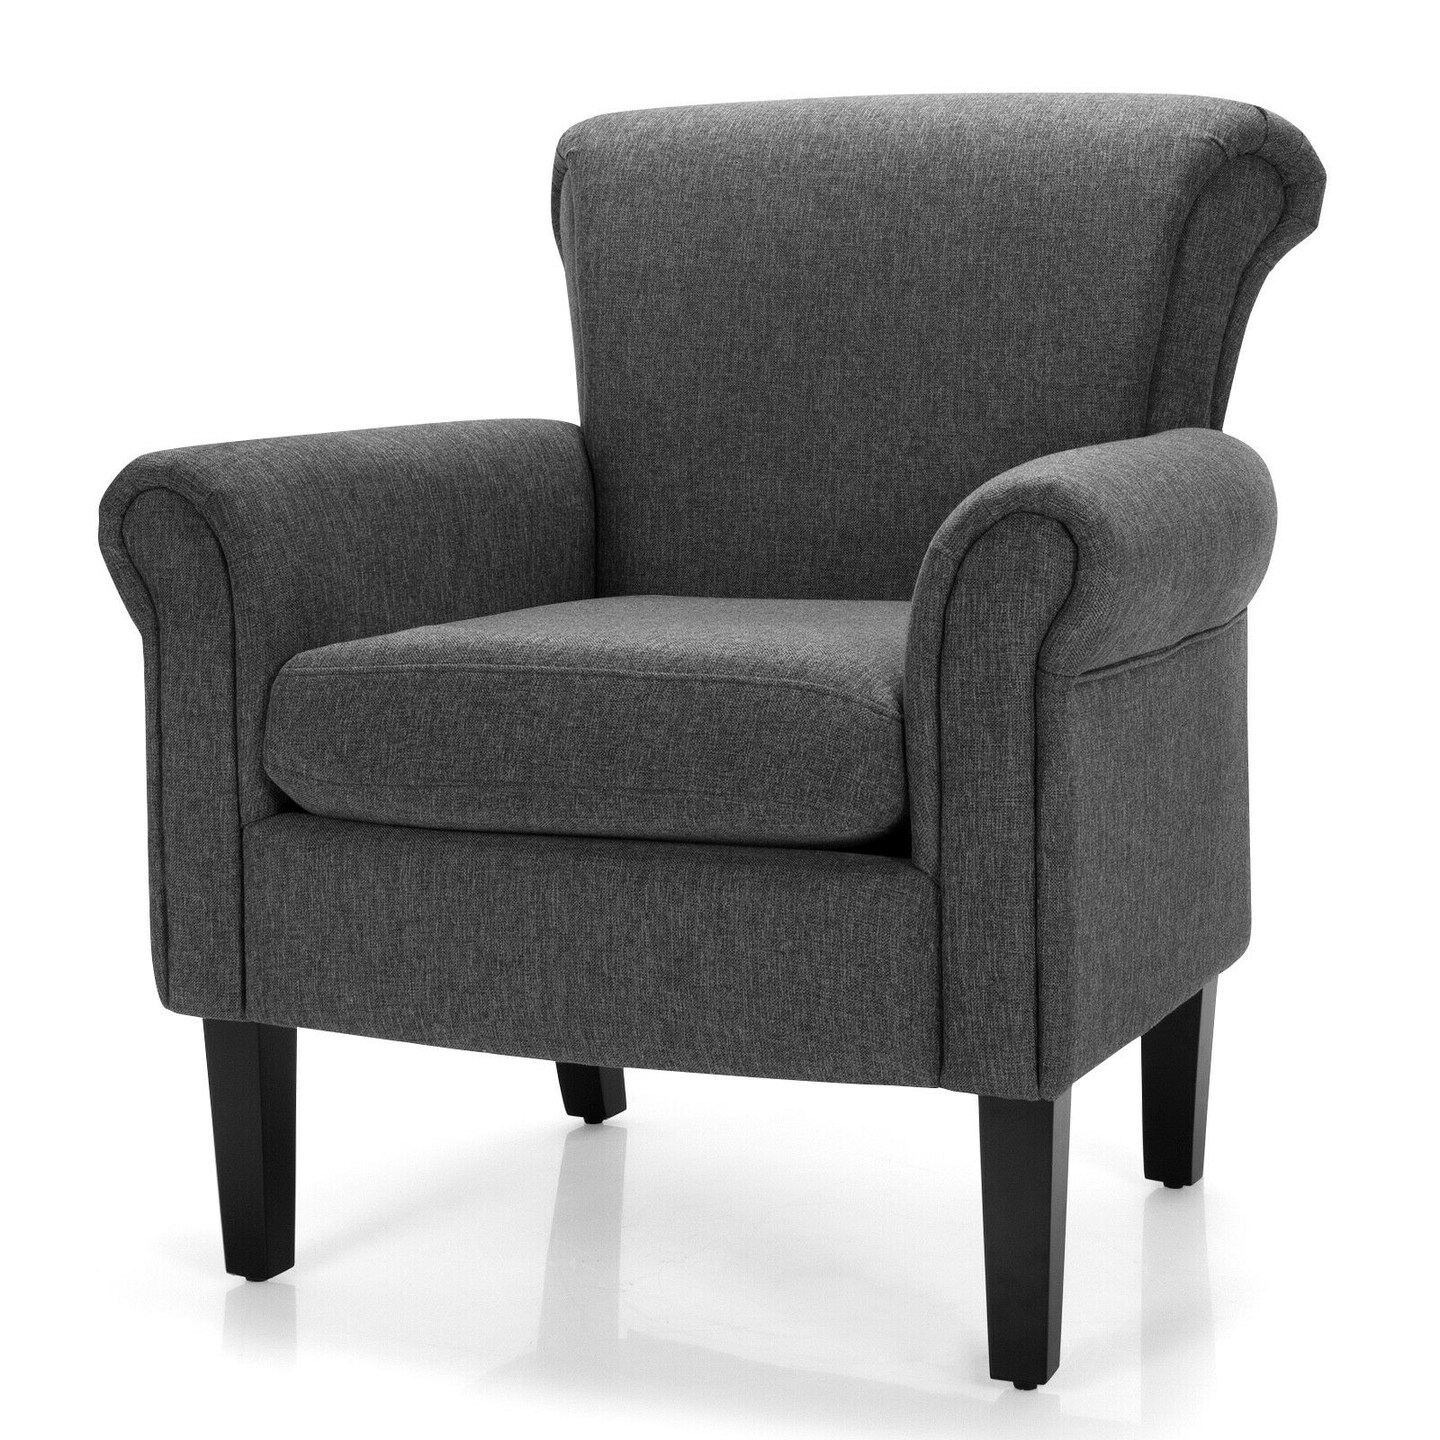 Upholstered Fabric Accent Chair with Adjustable Foot Pads